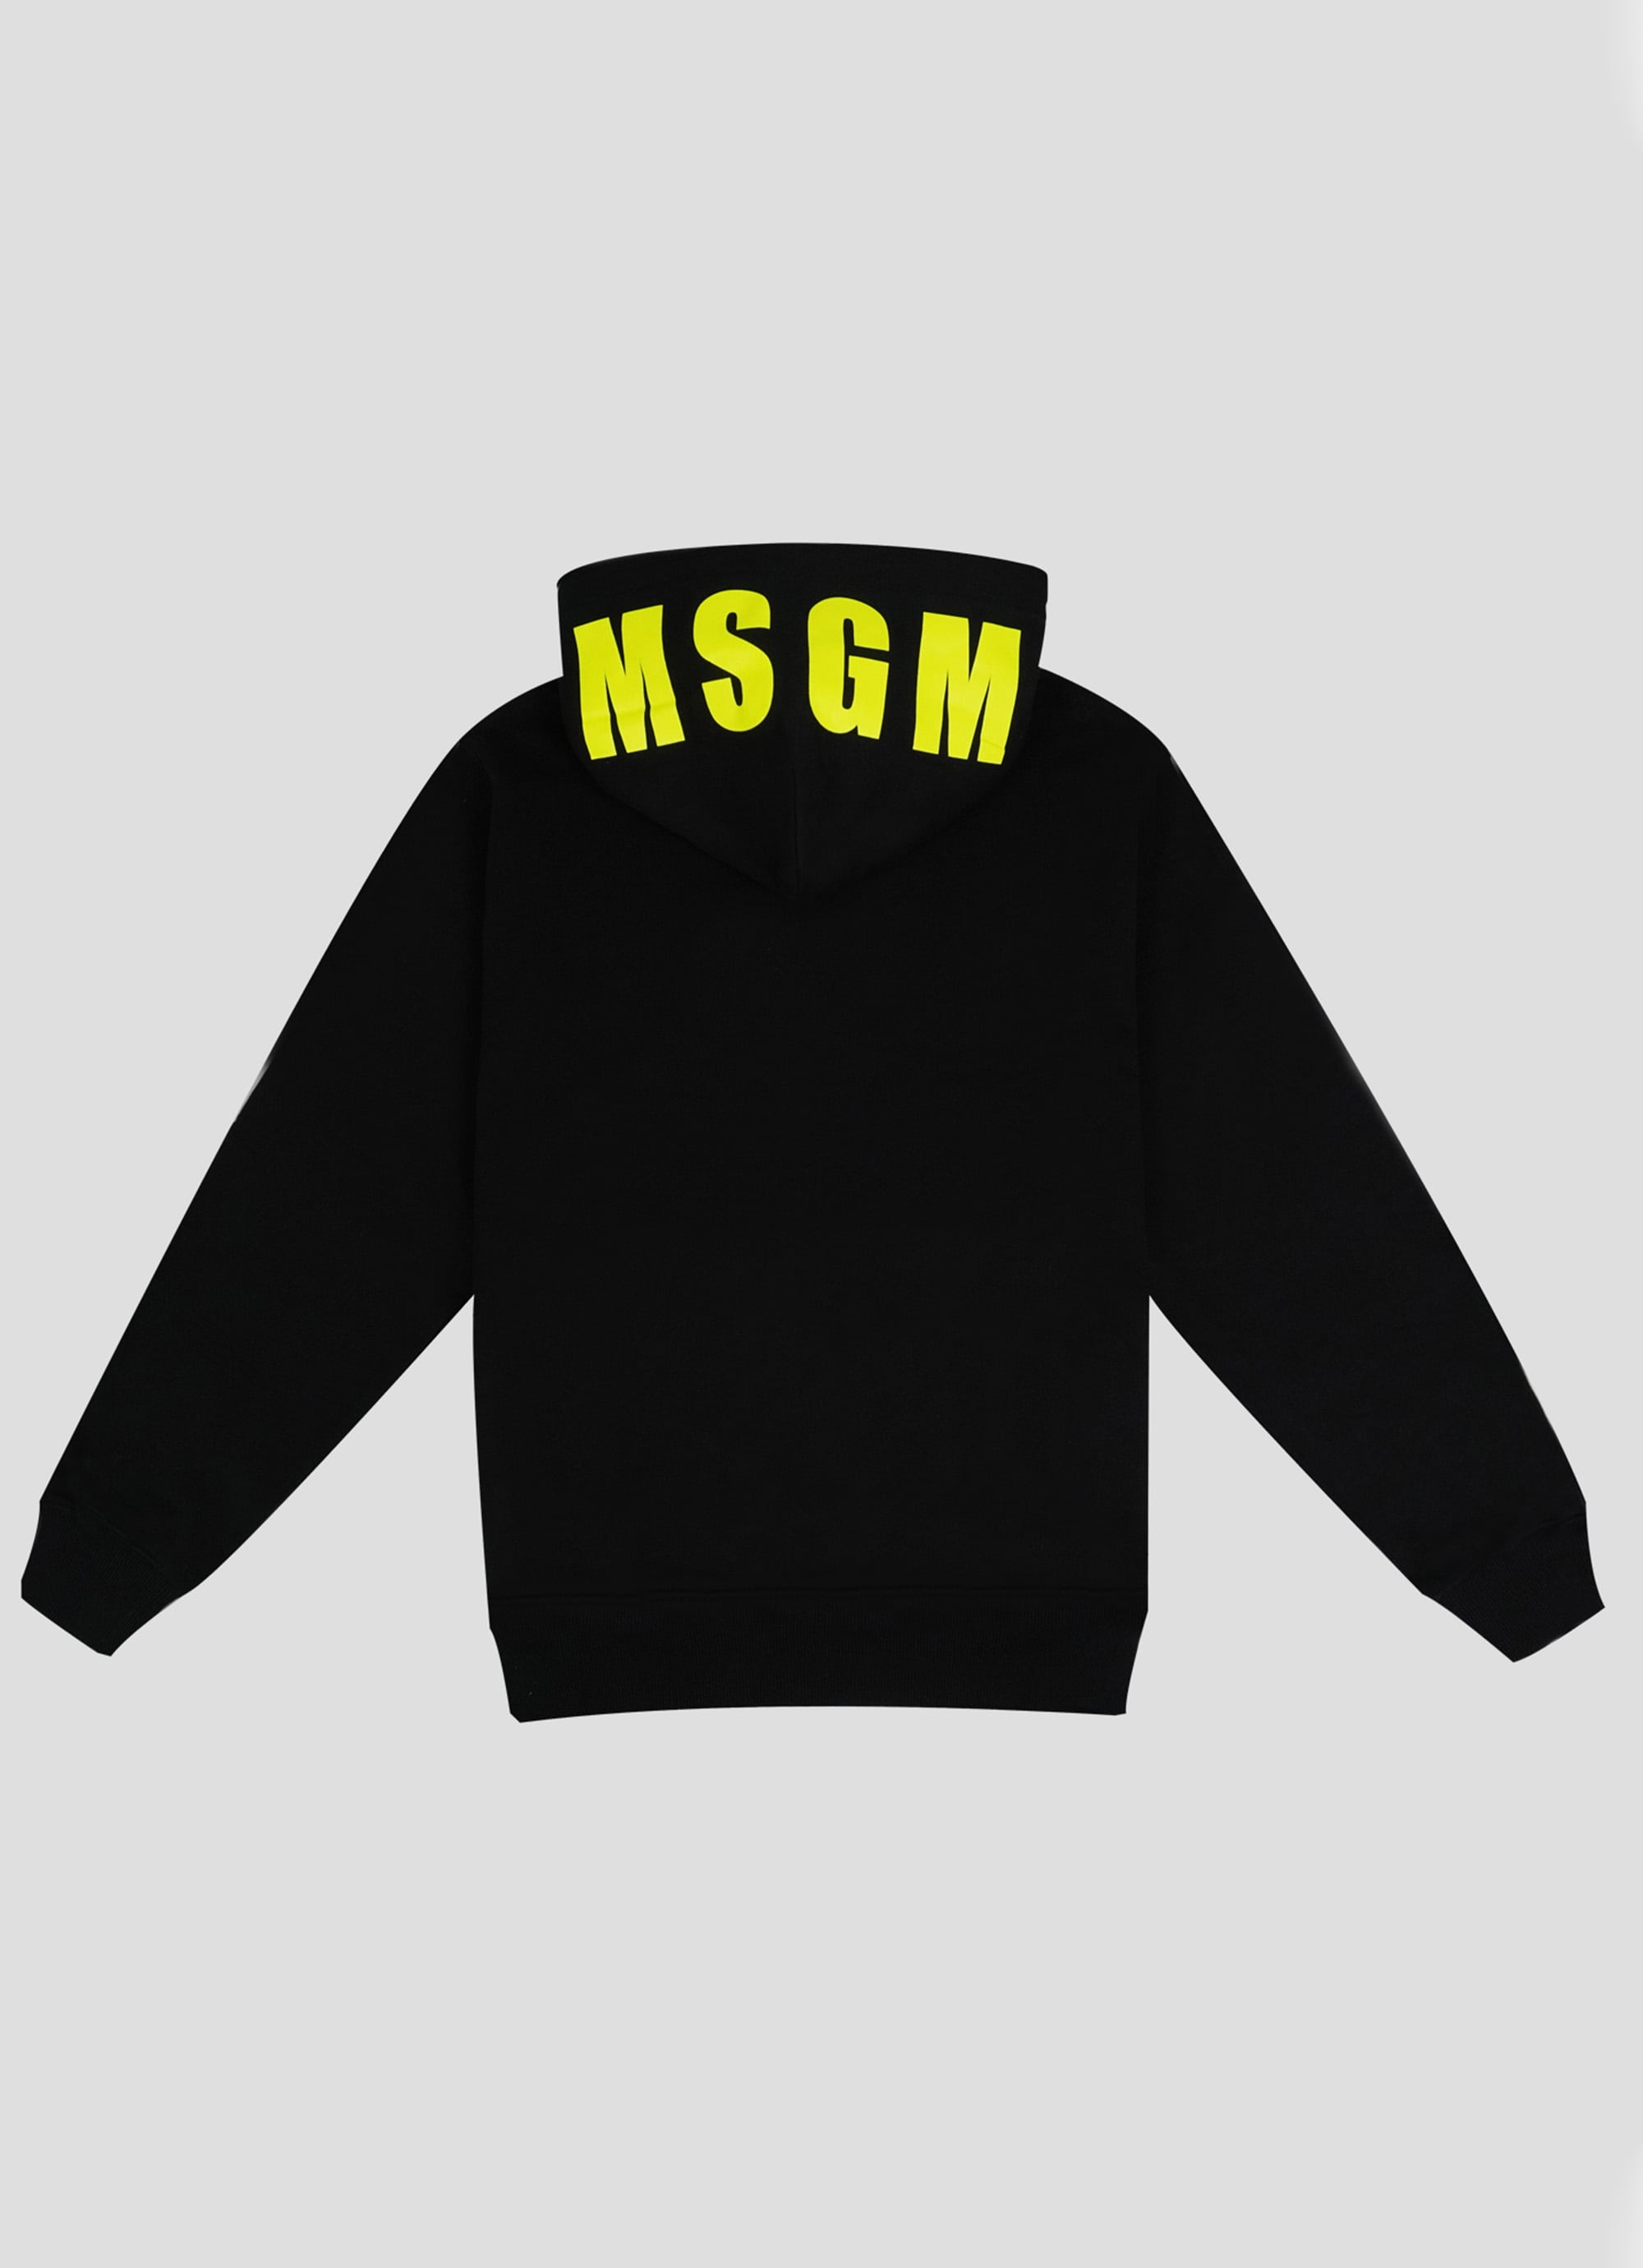 【MSGM】 【【New Color】フードロゴパーカー】｜aoi公式オンラインストア(aoi ONLINE STORE)